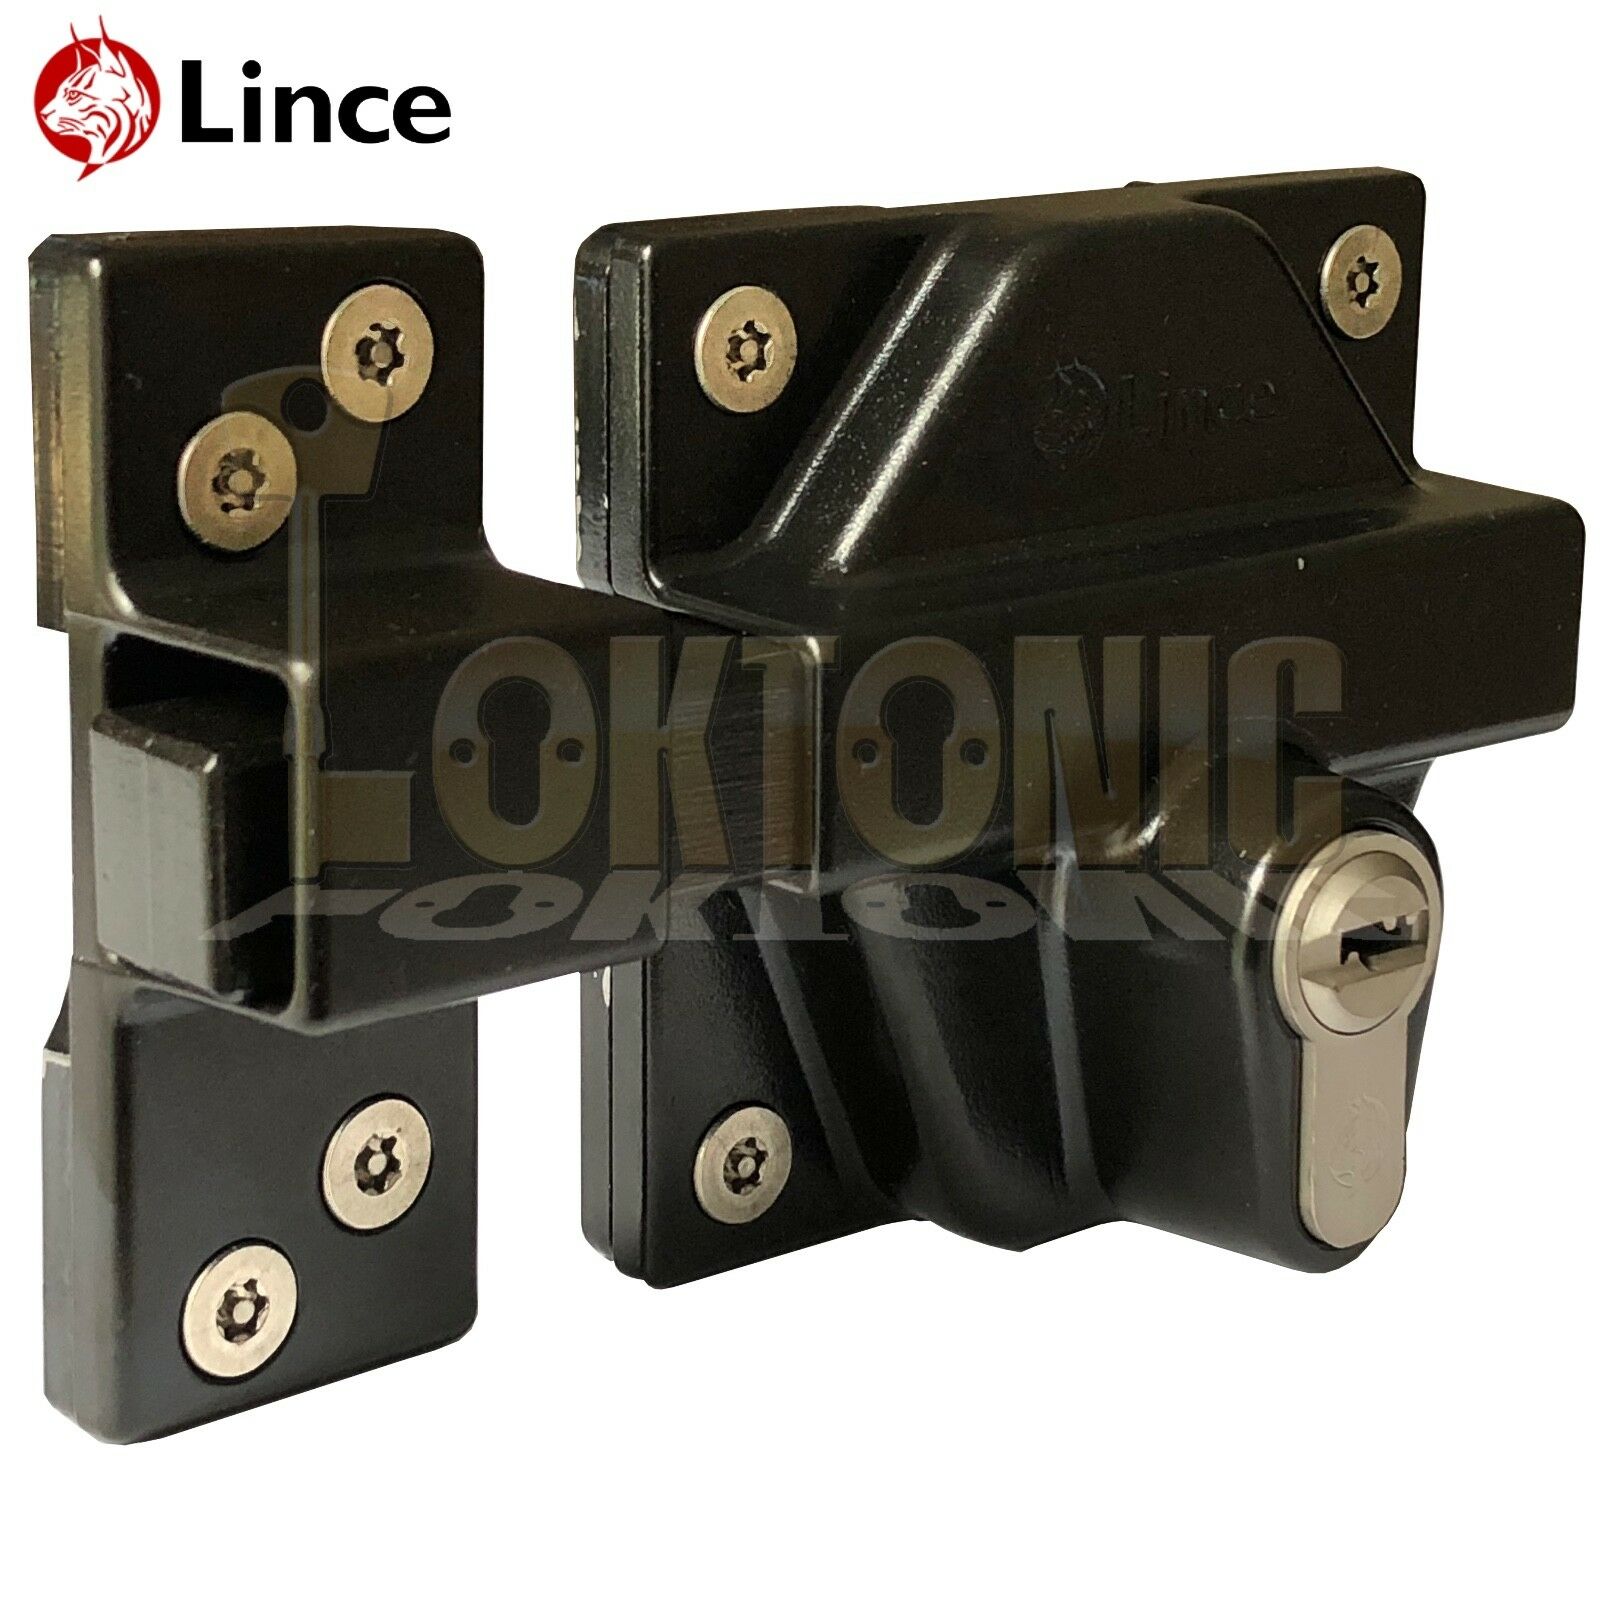 Lince Weld High Security Heavy Duty Euro Gate Slide Bolt Lock Wrought Iron Gates